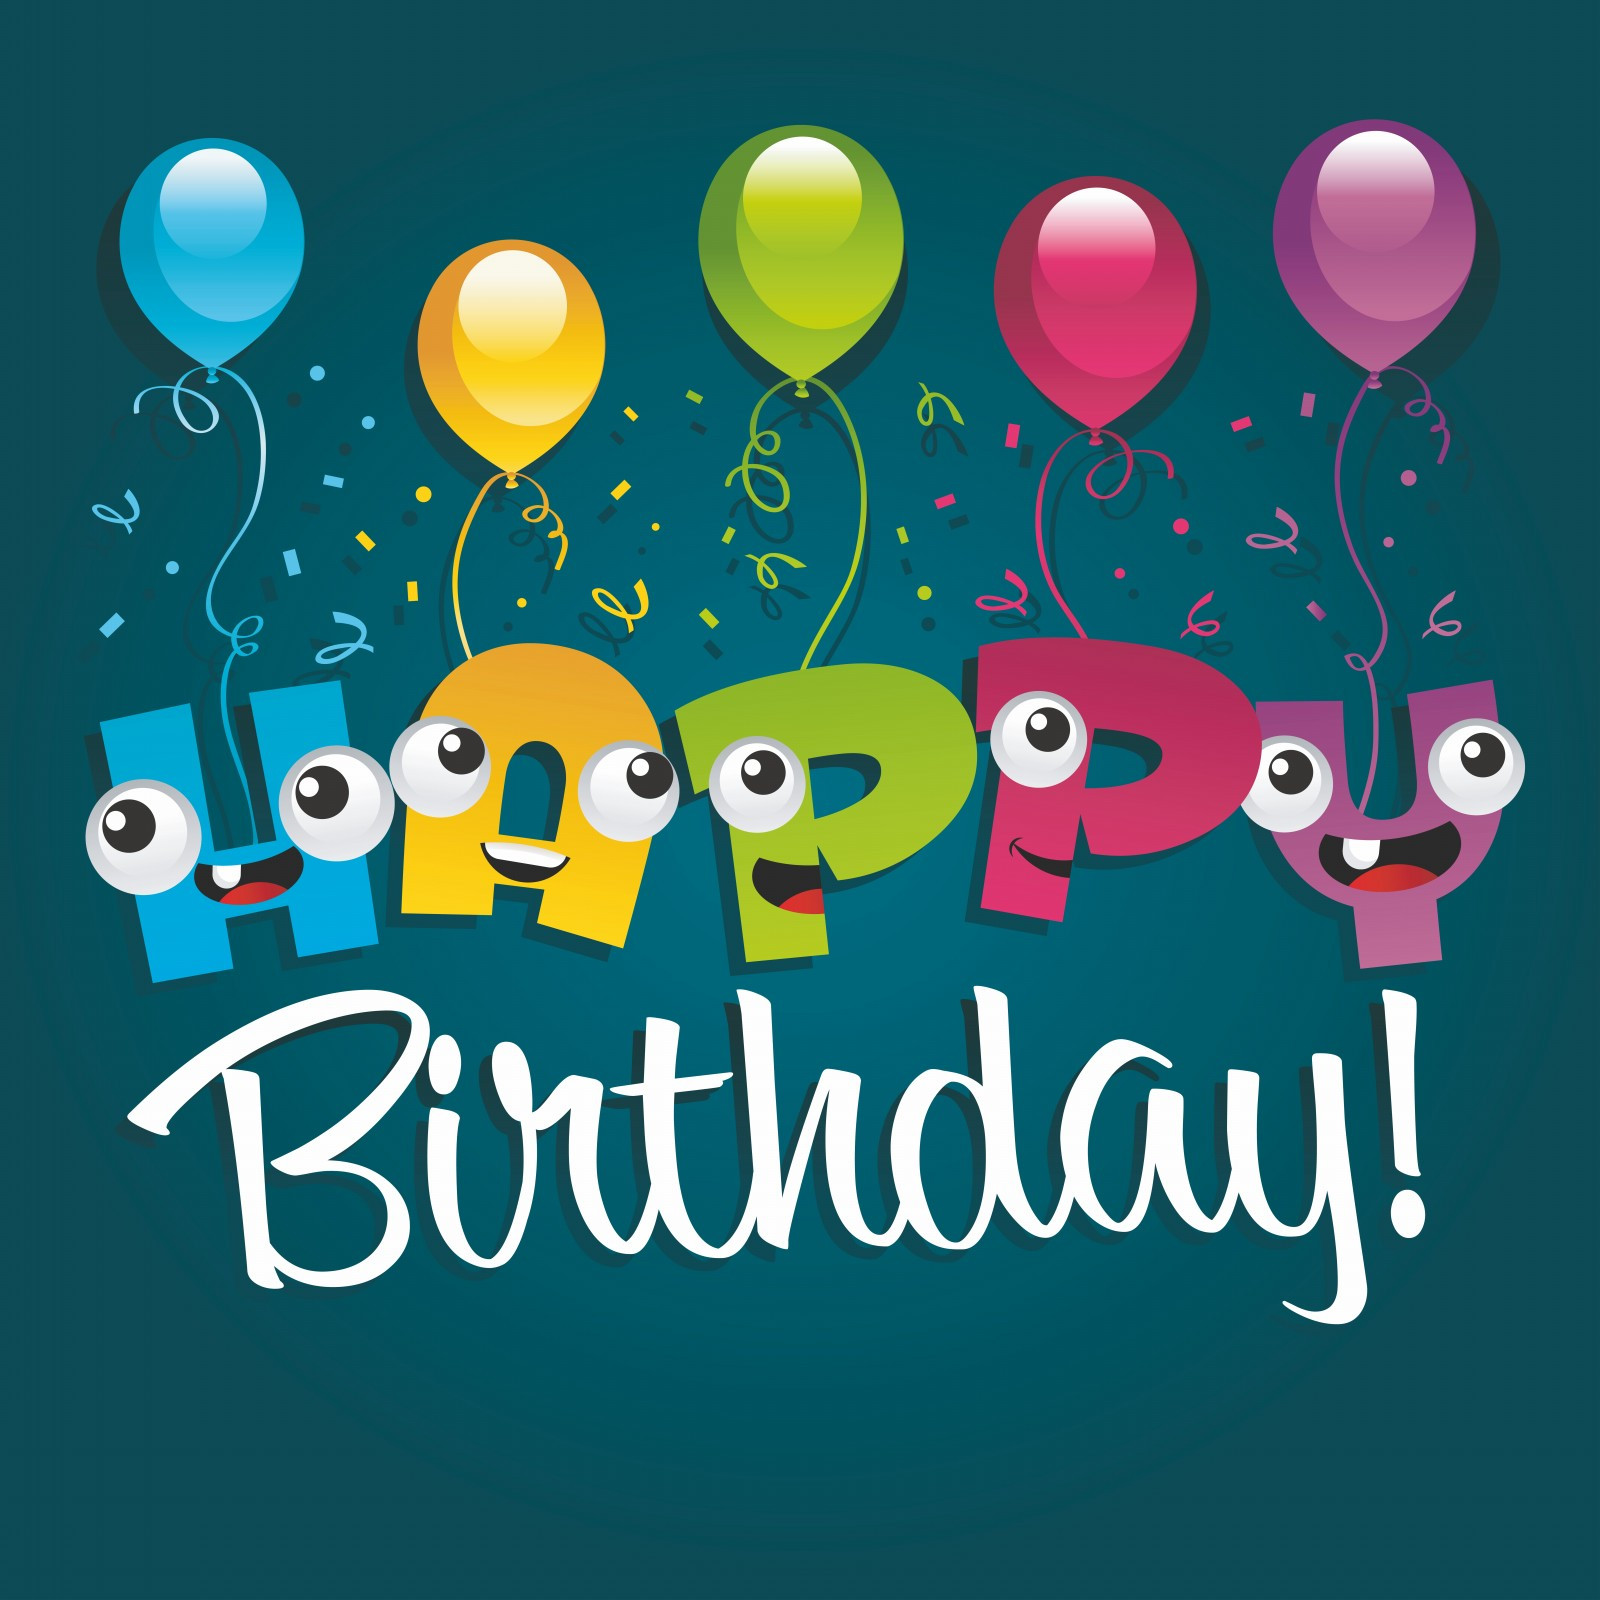 Birthday Greetings Cards
 35 Happy Birthday Cards Free To Download – The WoW Style